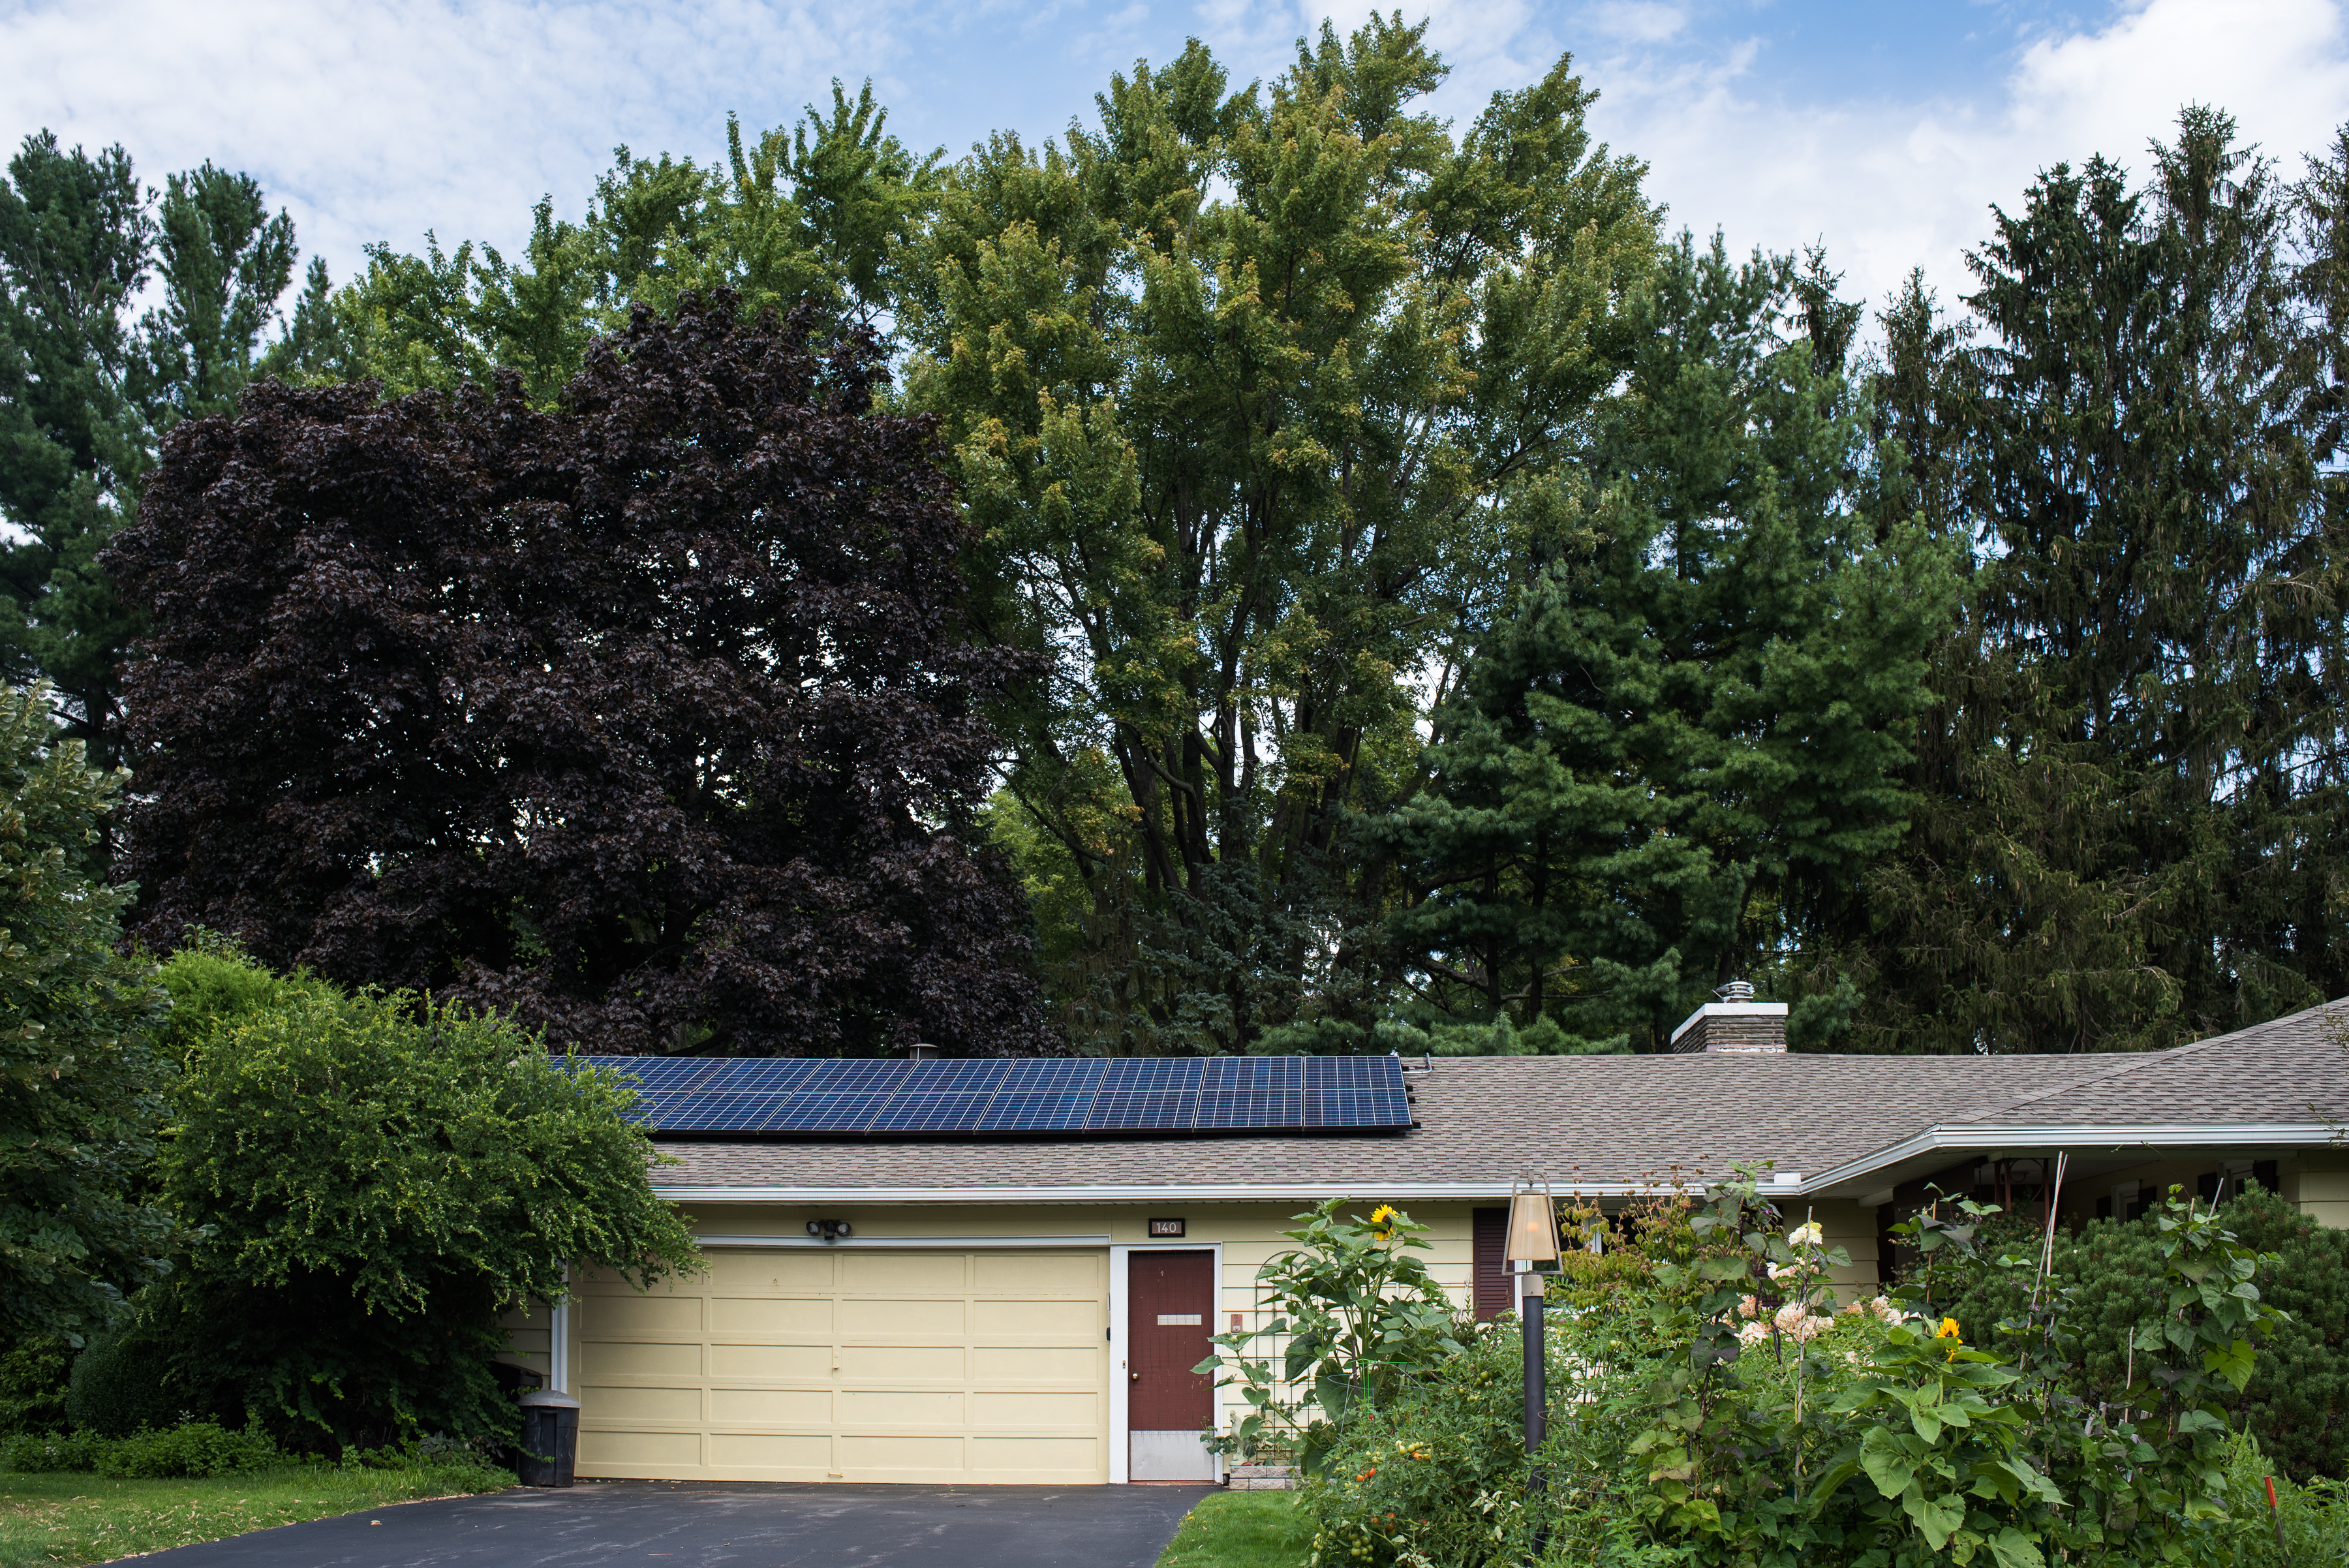 3 Common Roof Types for Residential Solar in the Rochester Area